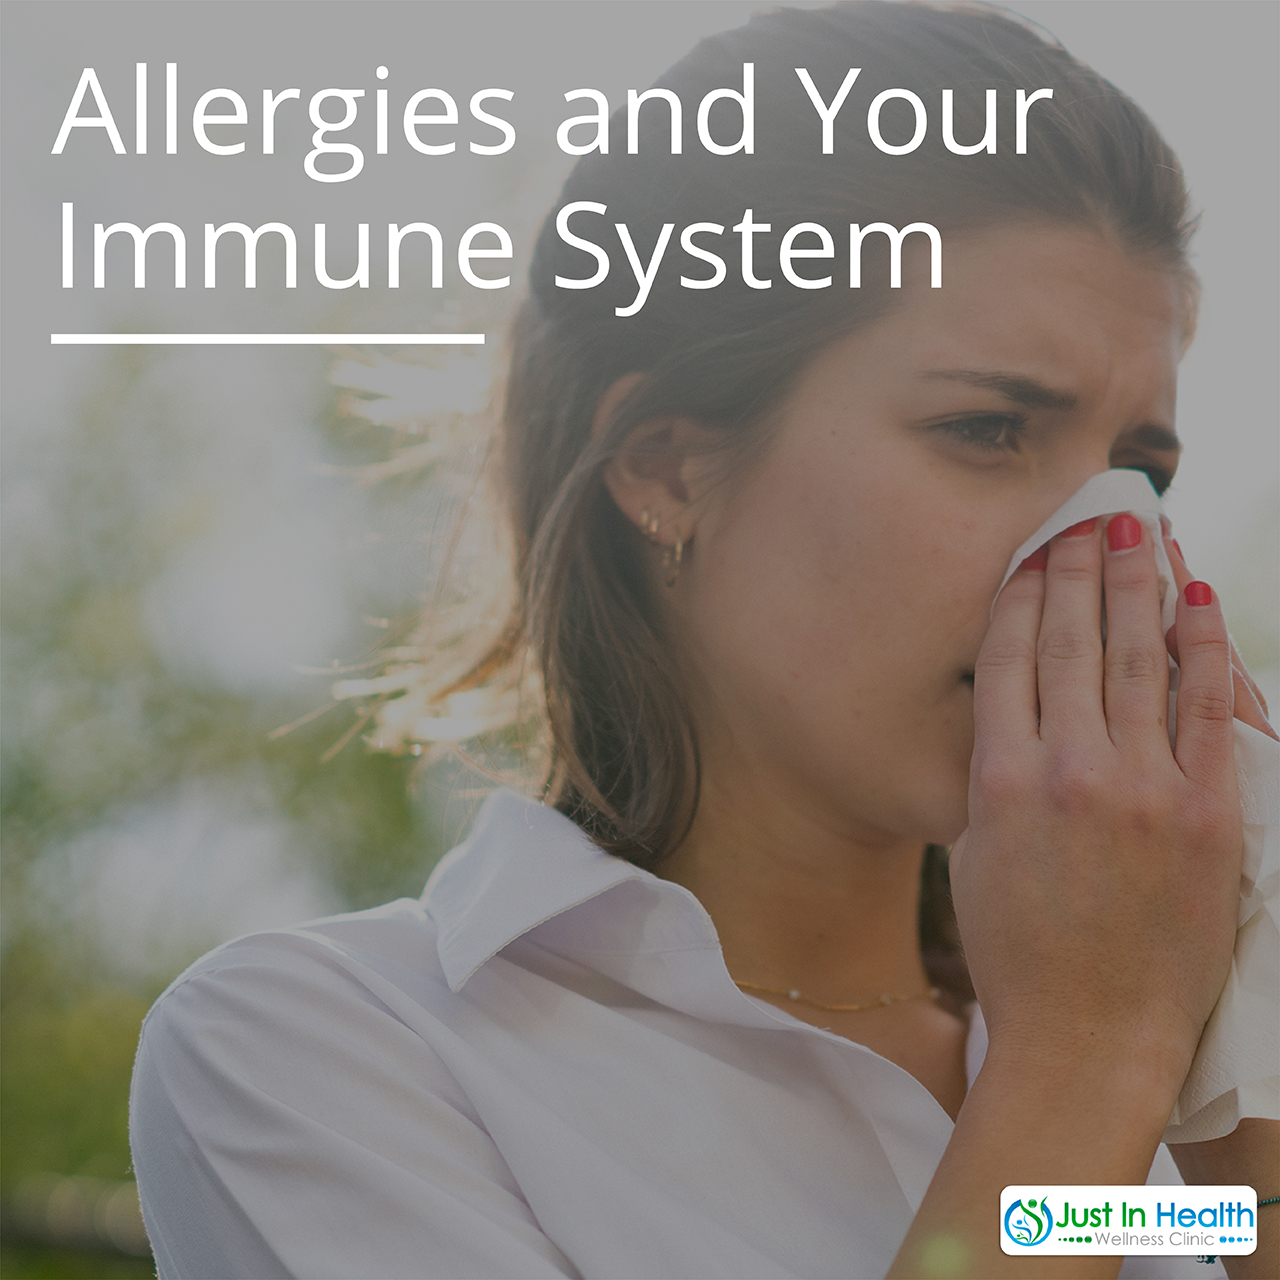 Allergies and Your Immune System